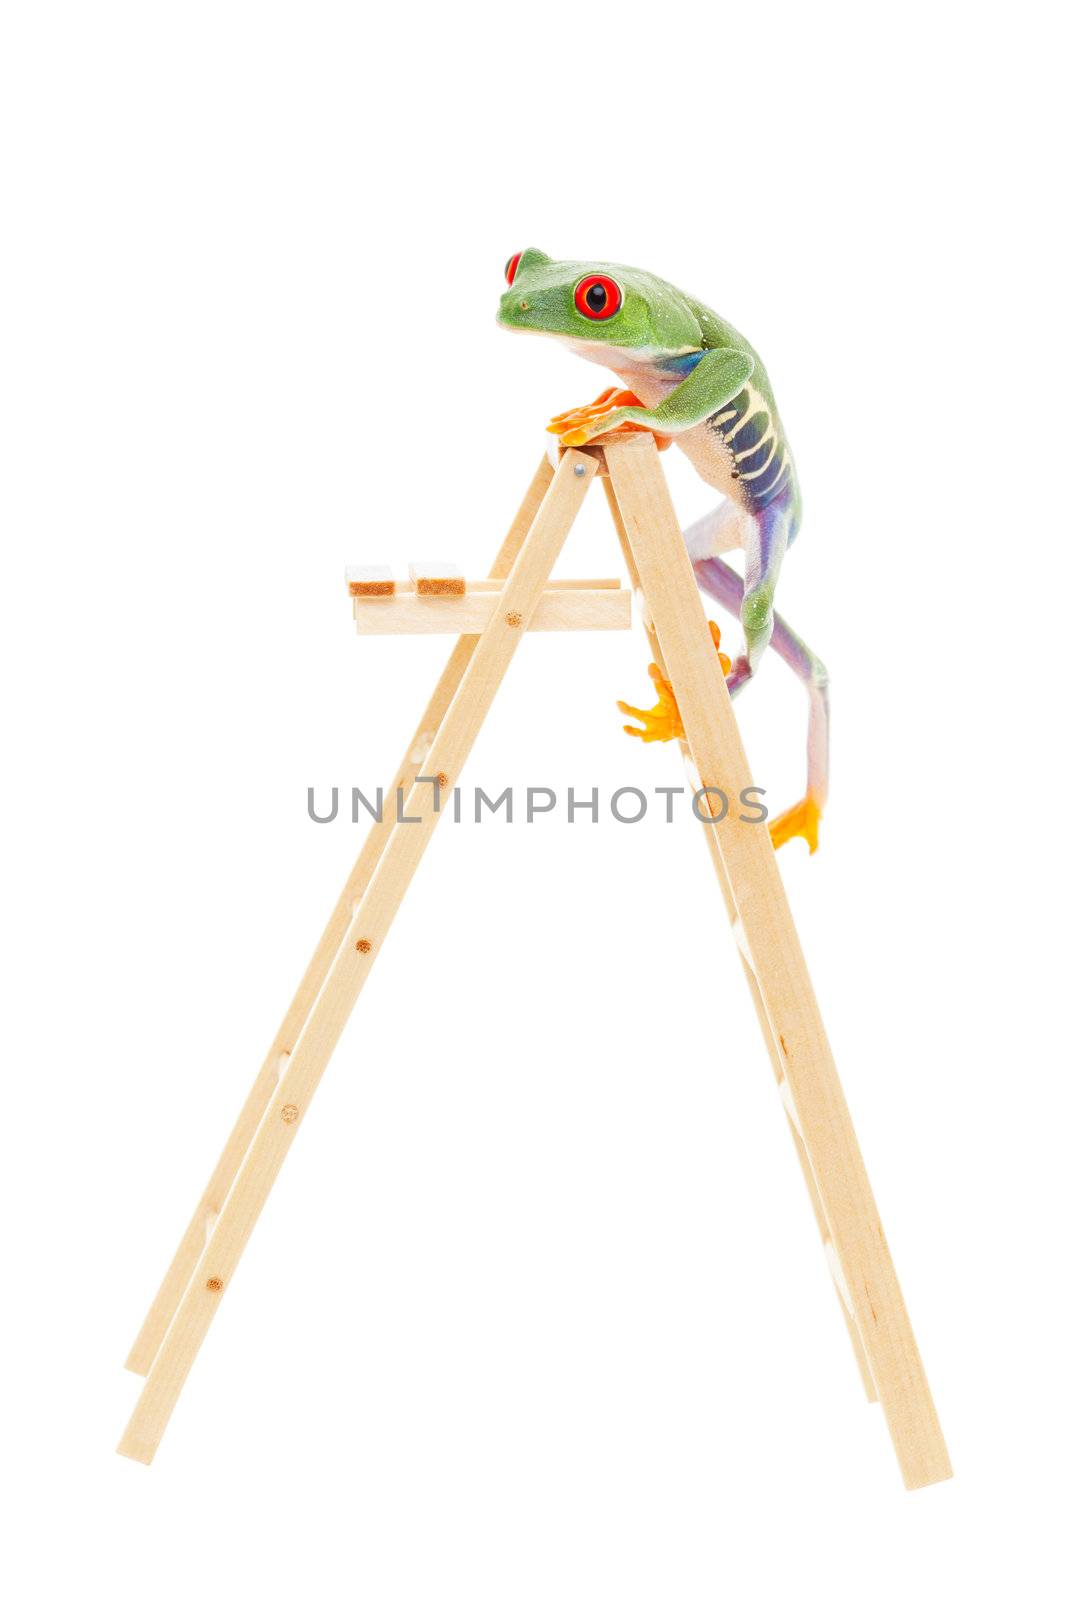 A red-eyed tree frog climbing to the top of the ladder.  Conceptual image to illustrate success, promotion, advancement.  Also pet shop or zoo under construction or expansion.  Shot on white background.